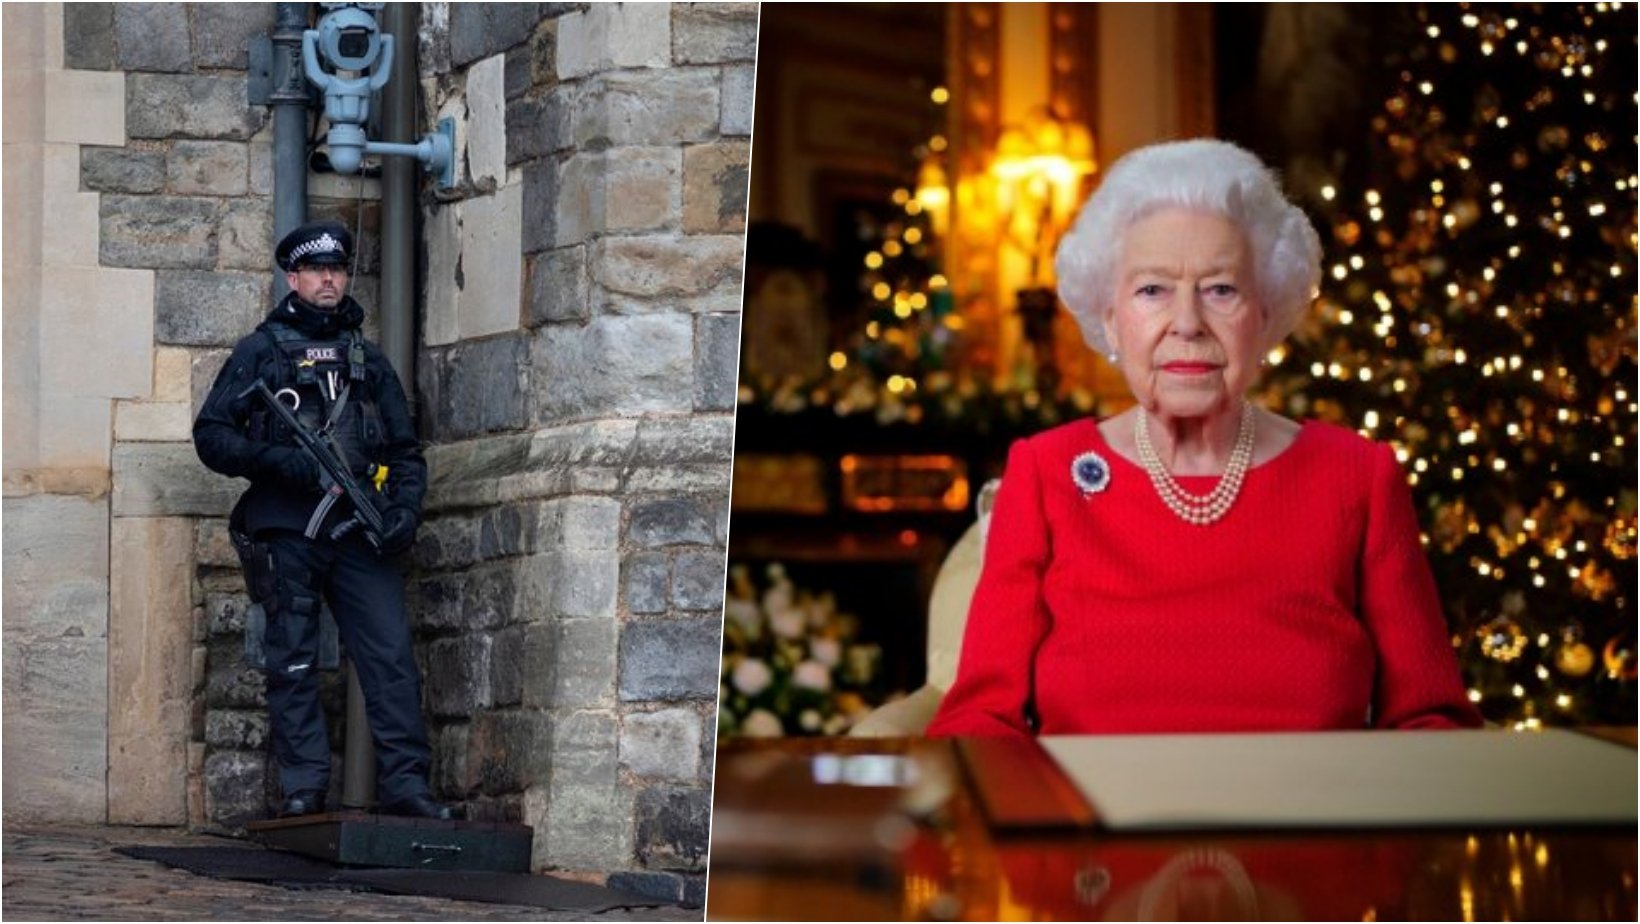 6 facebook cover 7.jpg?resize=1200,630 - The Queen’s Safety Is Under THREAT After Windsor Castle Security Breach